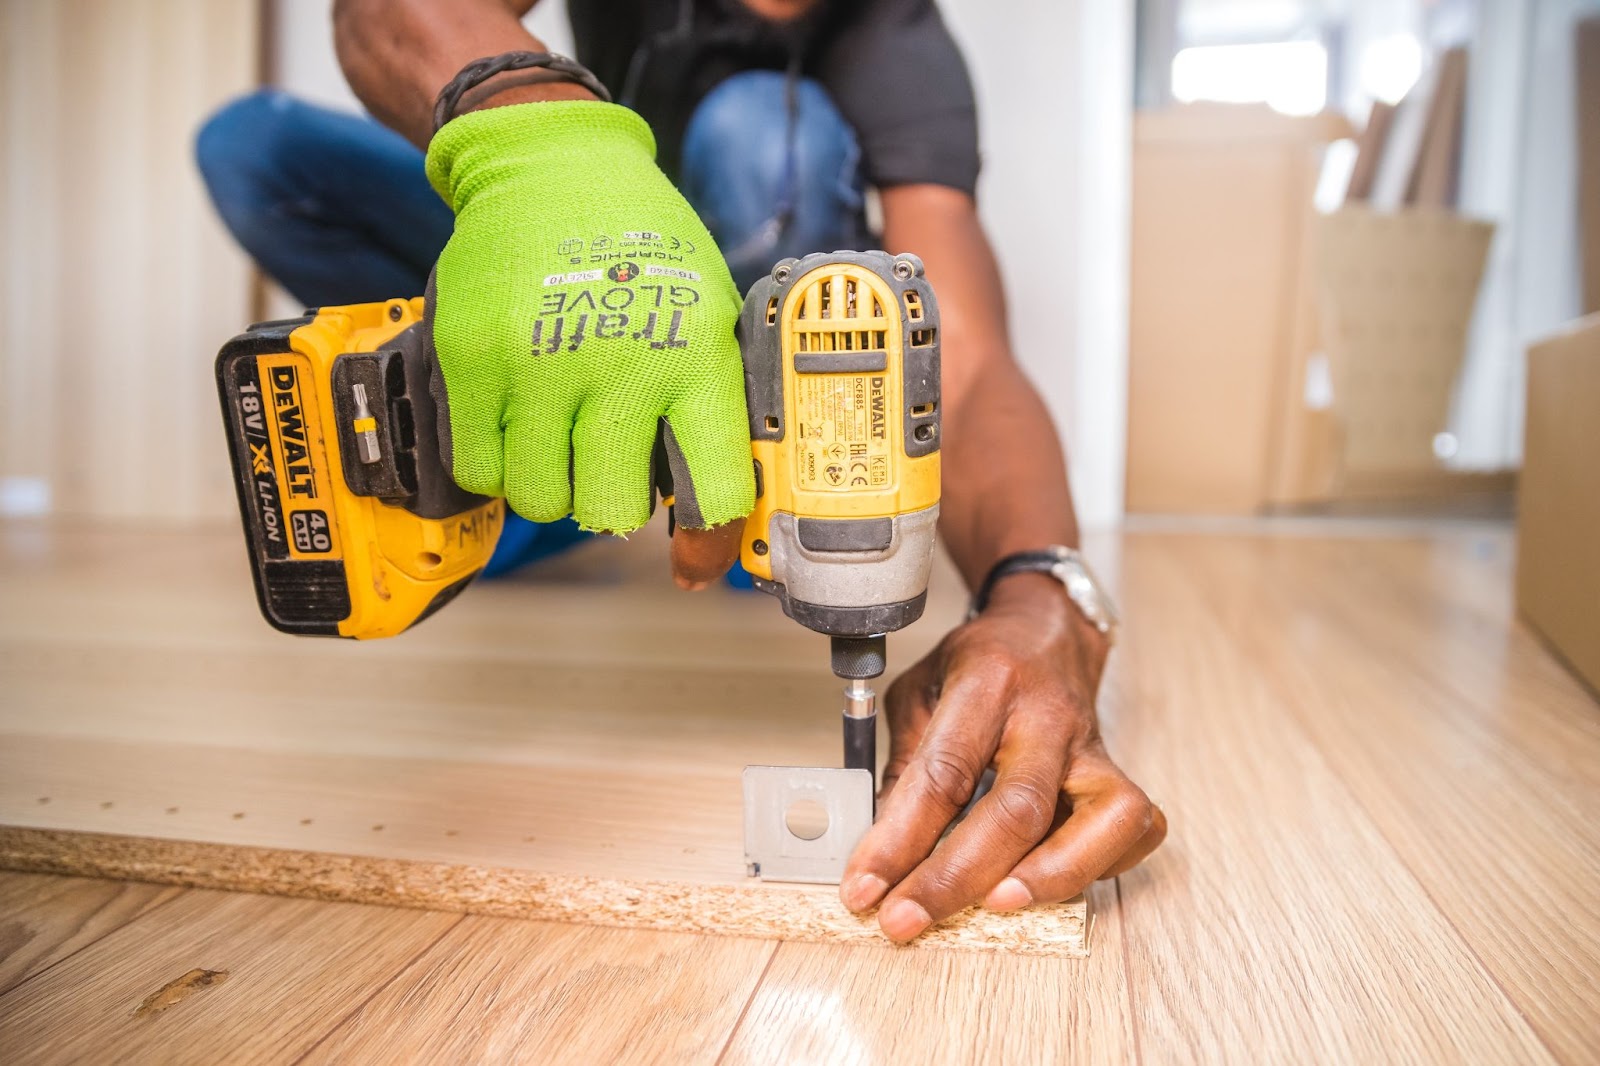 carpenters and construction workers are in high demand right after finishing tech school